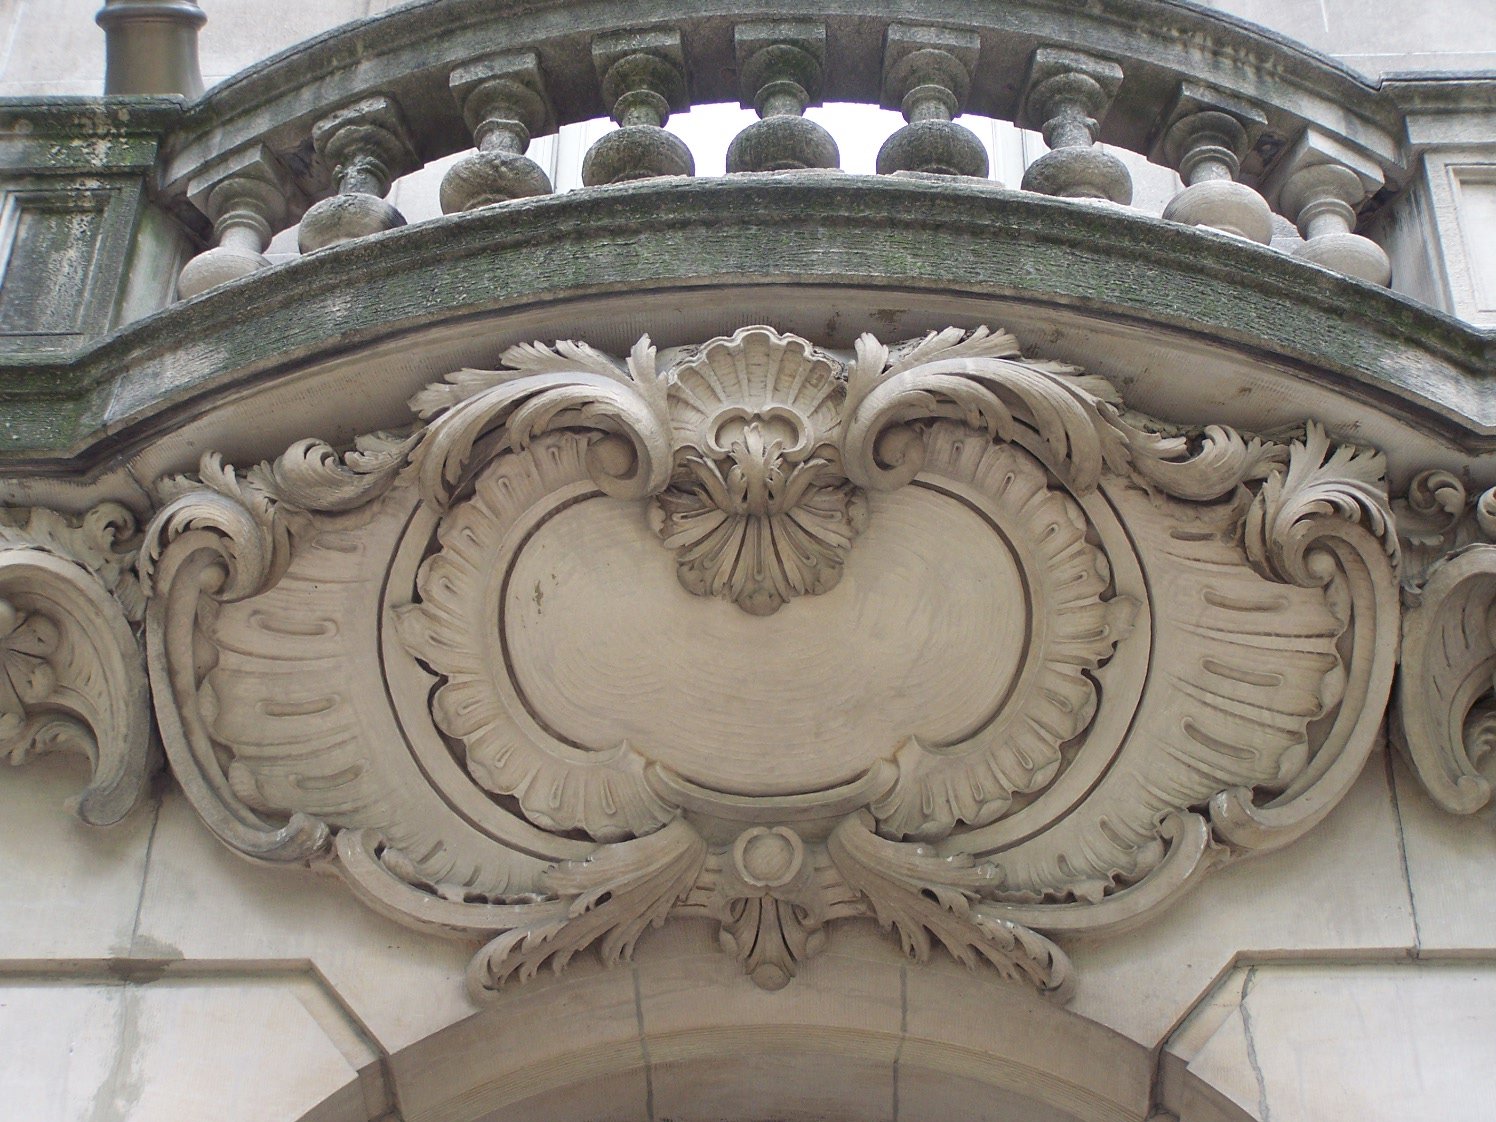 an ornamental, stucco building decorated with carvings and birds